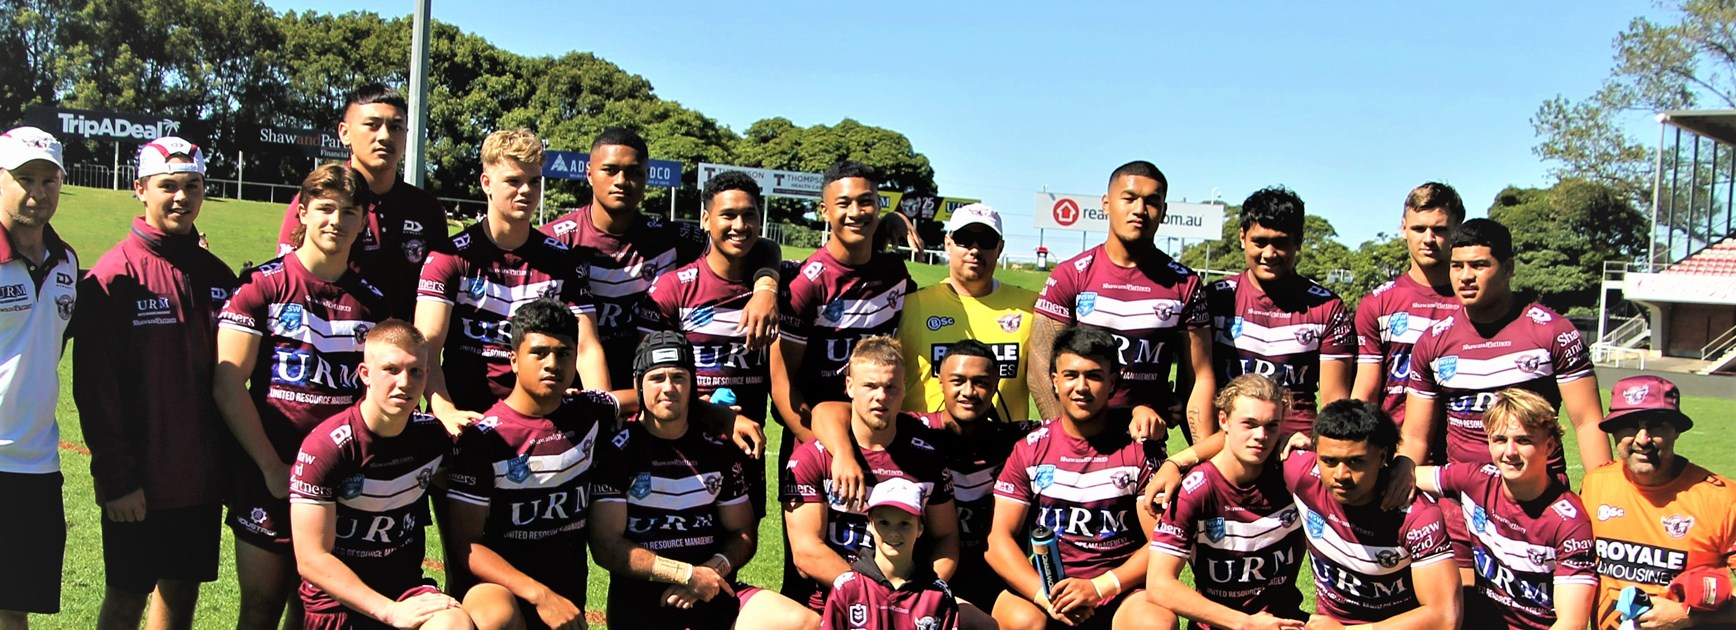 Manly finished the regular season of the Harold Matthews Cup as undefeated minor premiers.